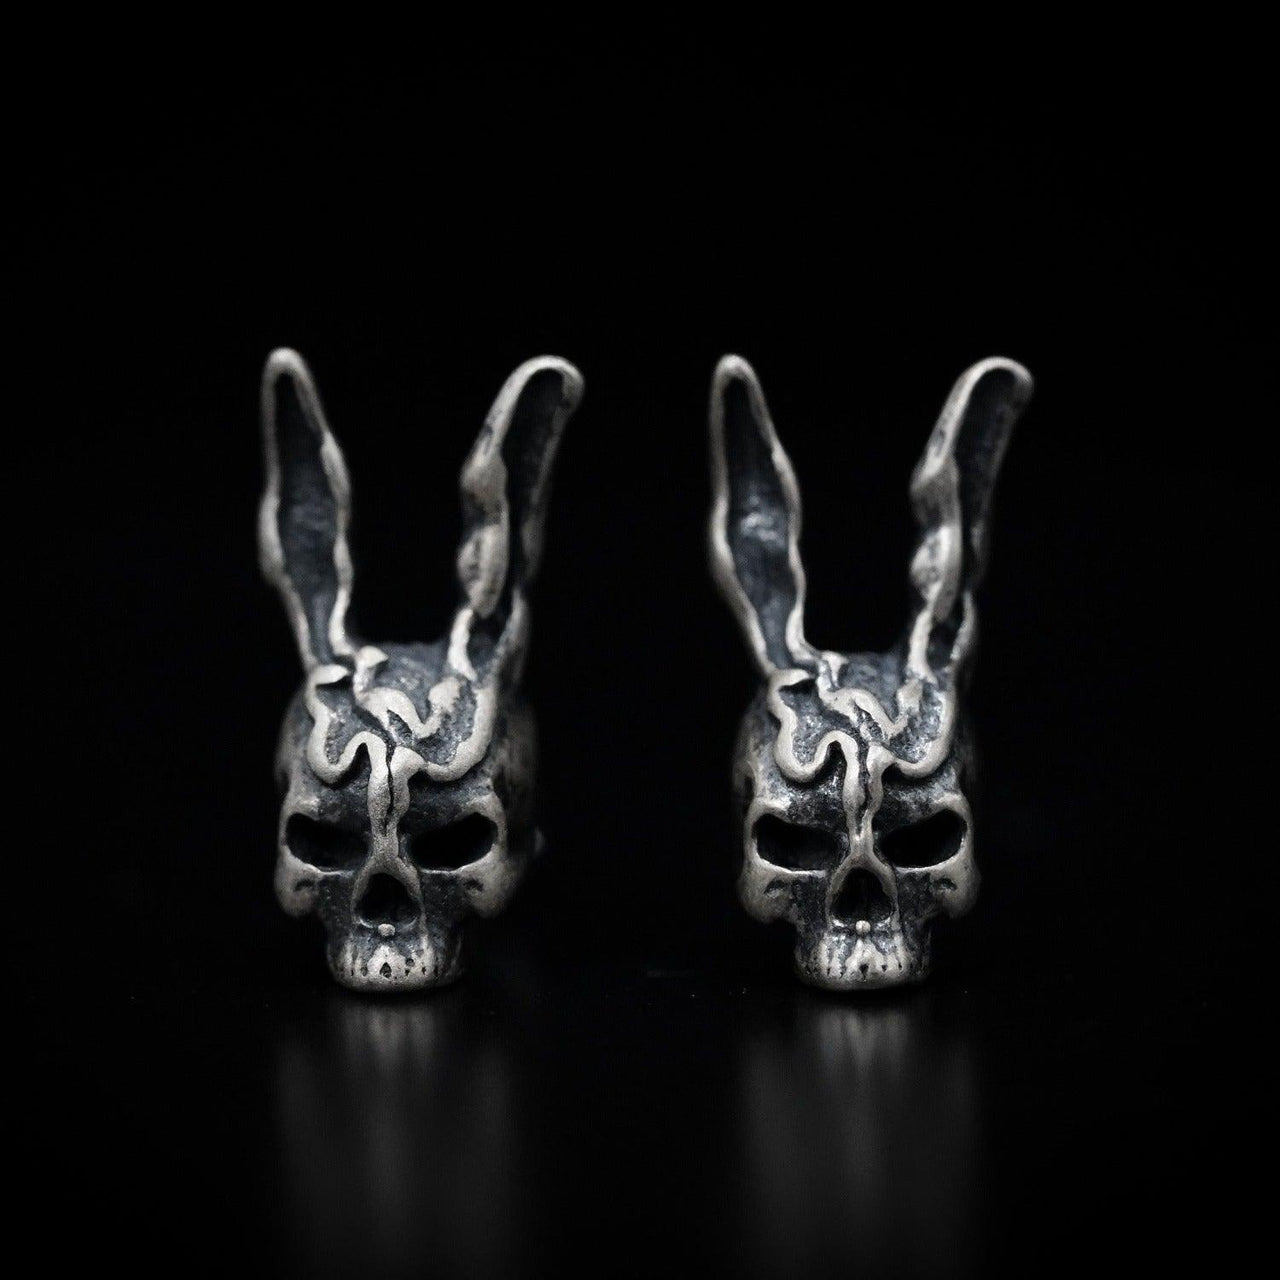 Donnie Darko, Frank The Rabbit Sterling Silver Stud Earrings - Black Feather Design